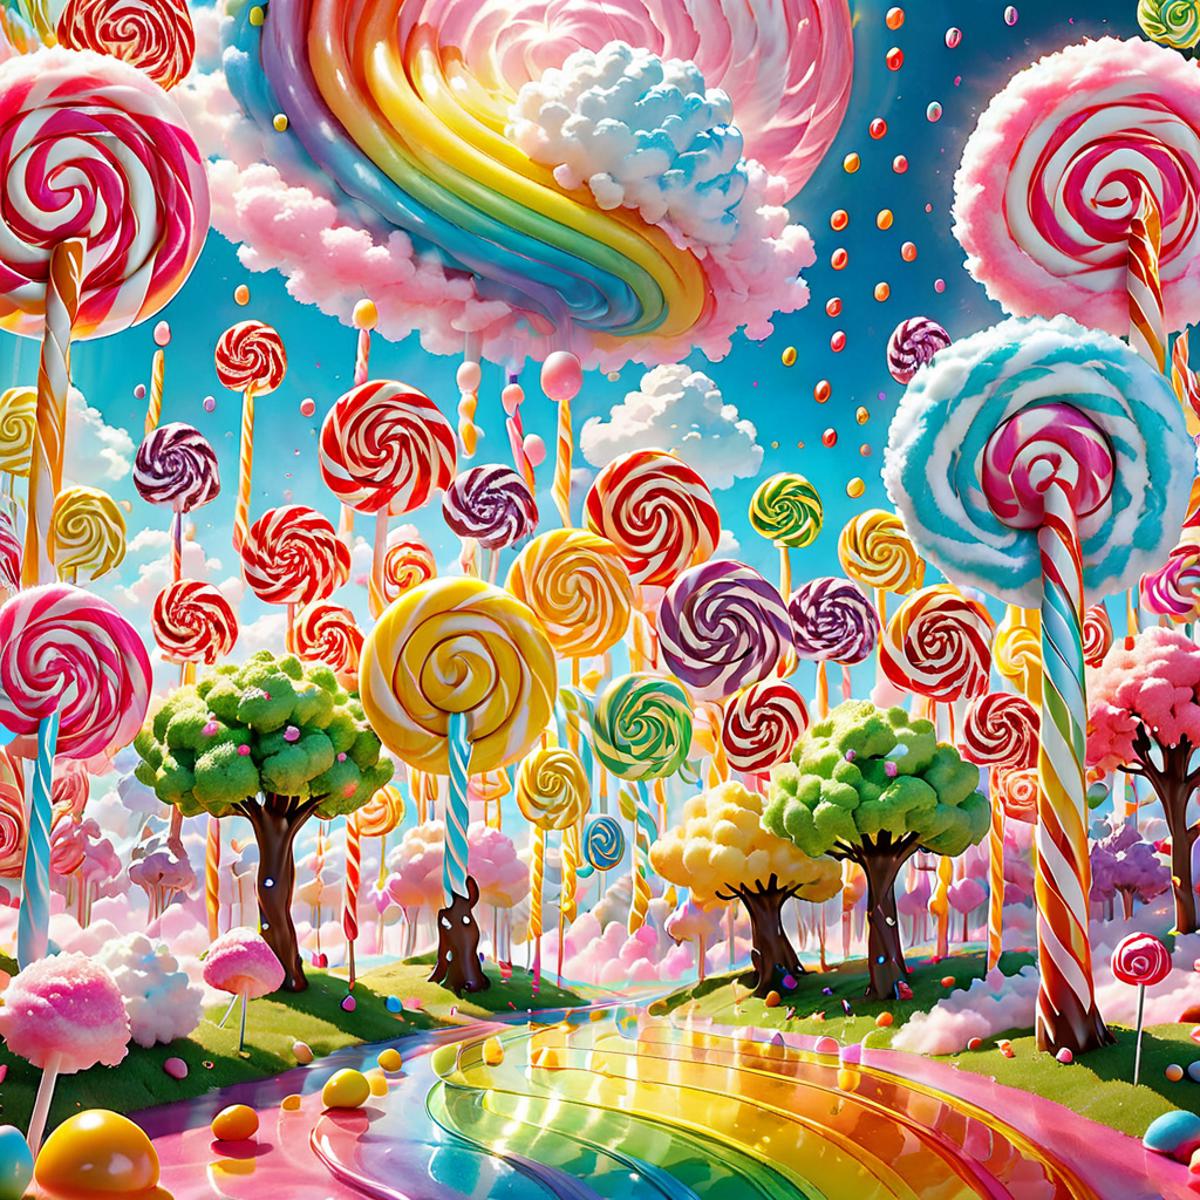 Candy Land image by _Pixel